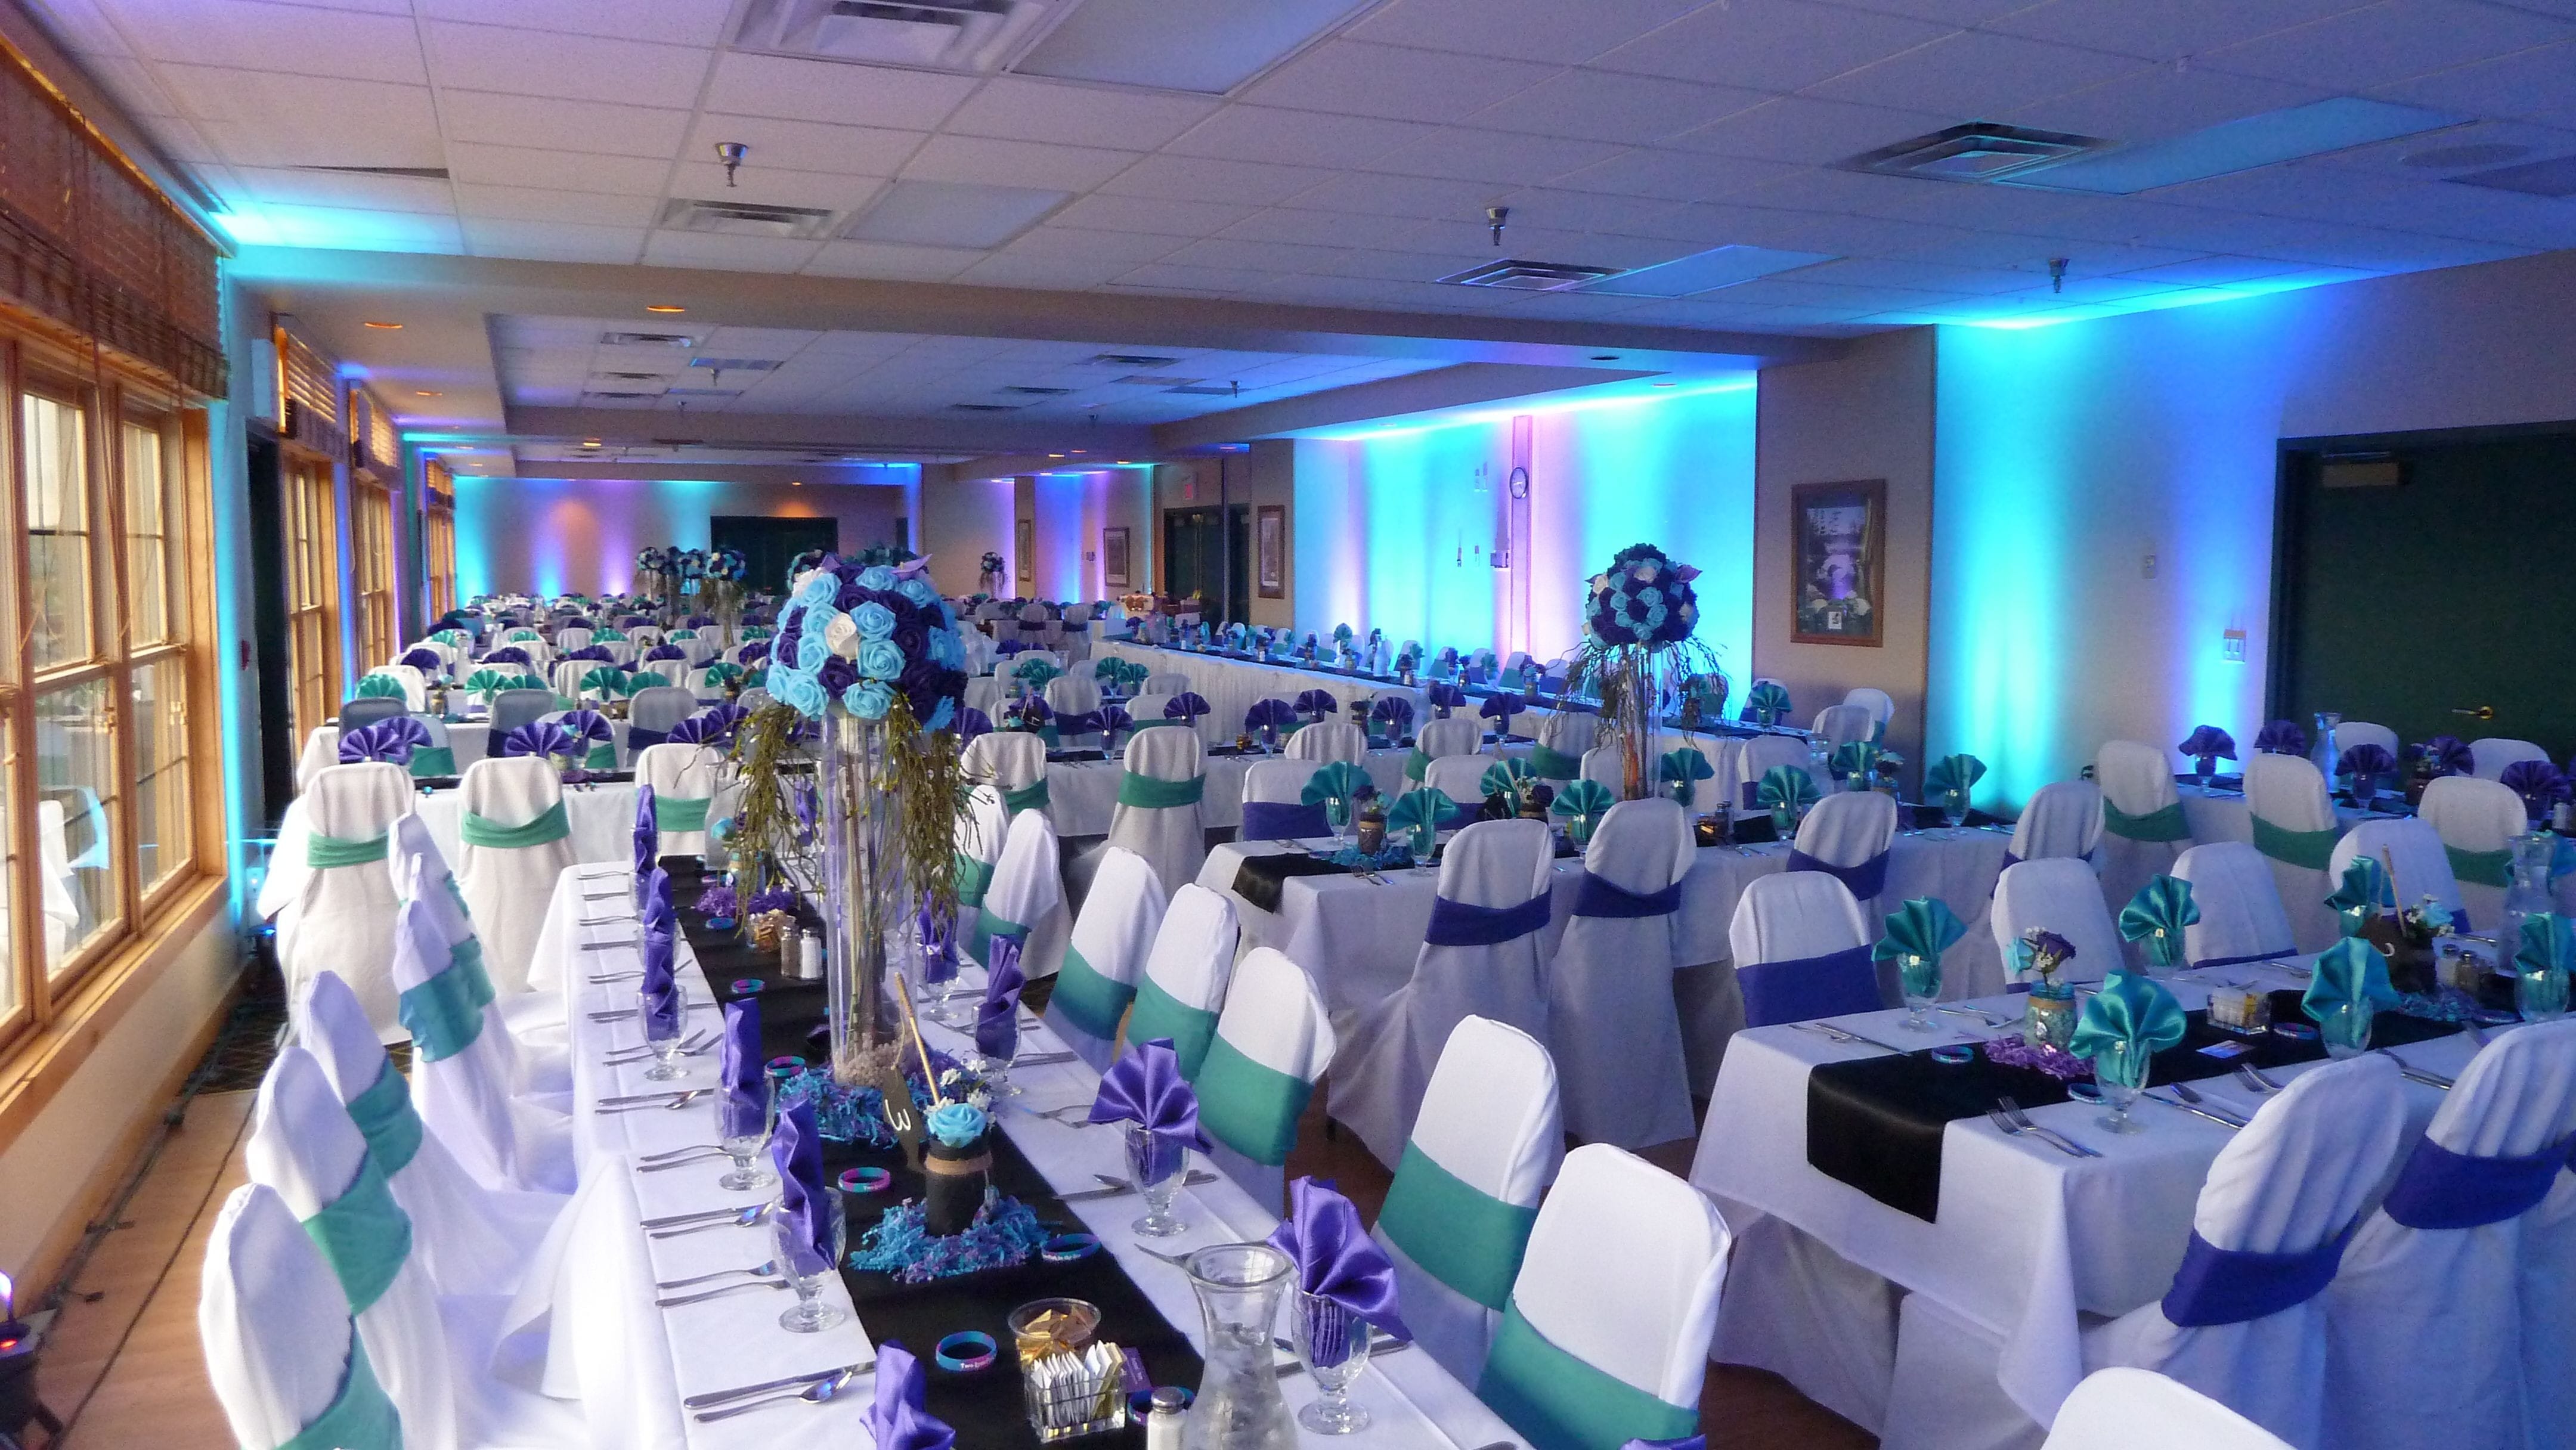 Grand Ely Lodge.
Wedding lighting in teal and magenta pink.